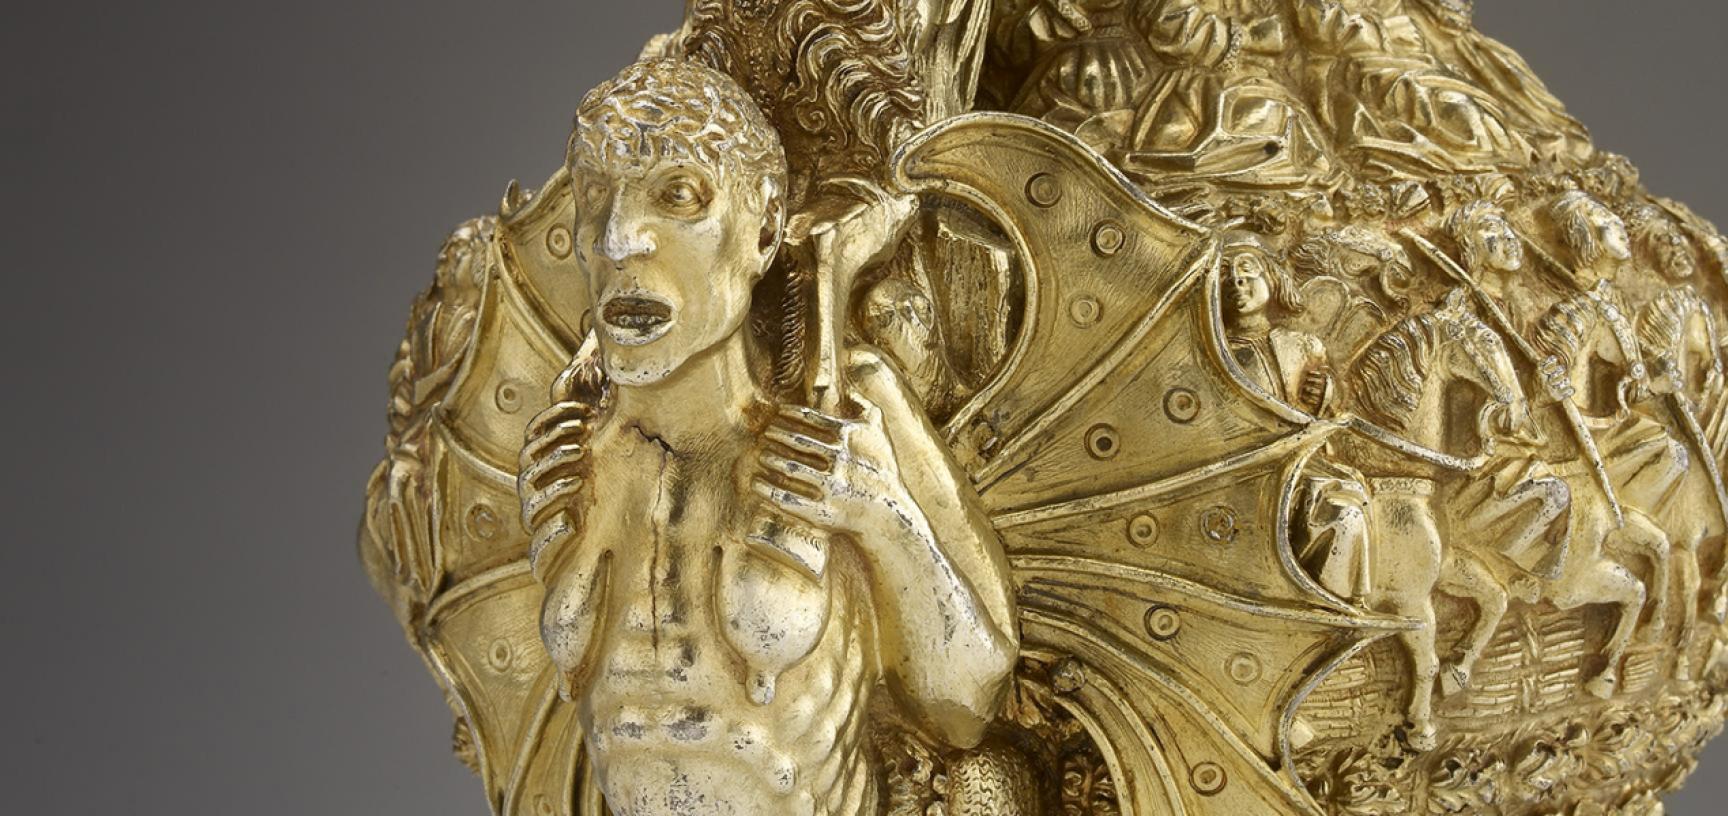 PORTUGUESE GILT EWER from the Ashmolean collections (detail)